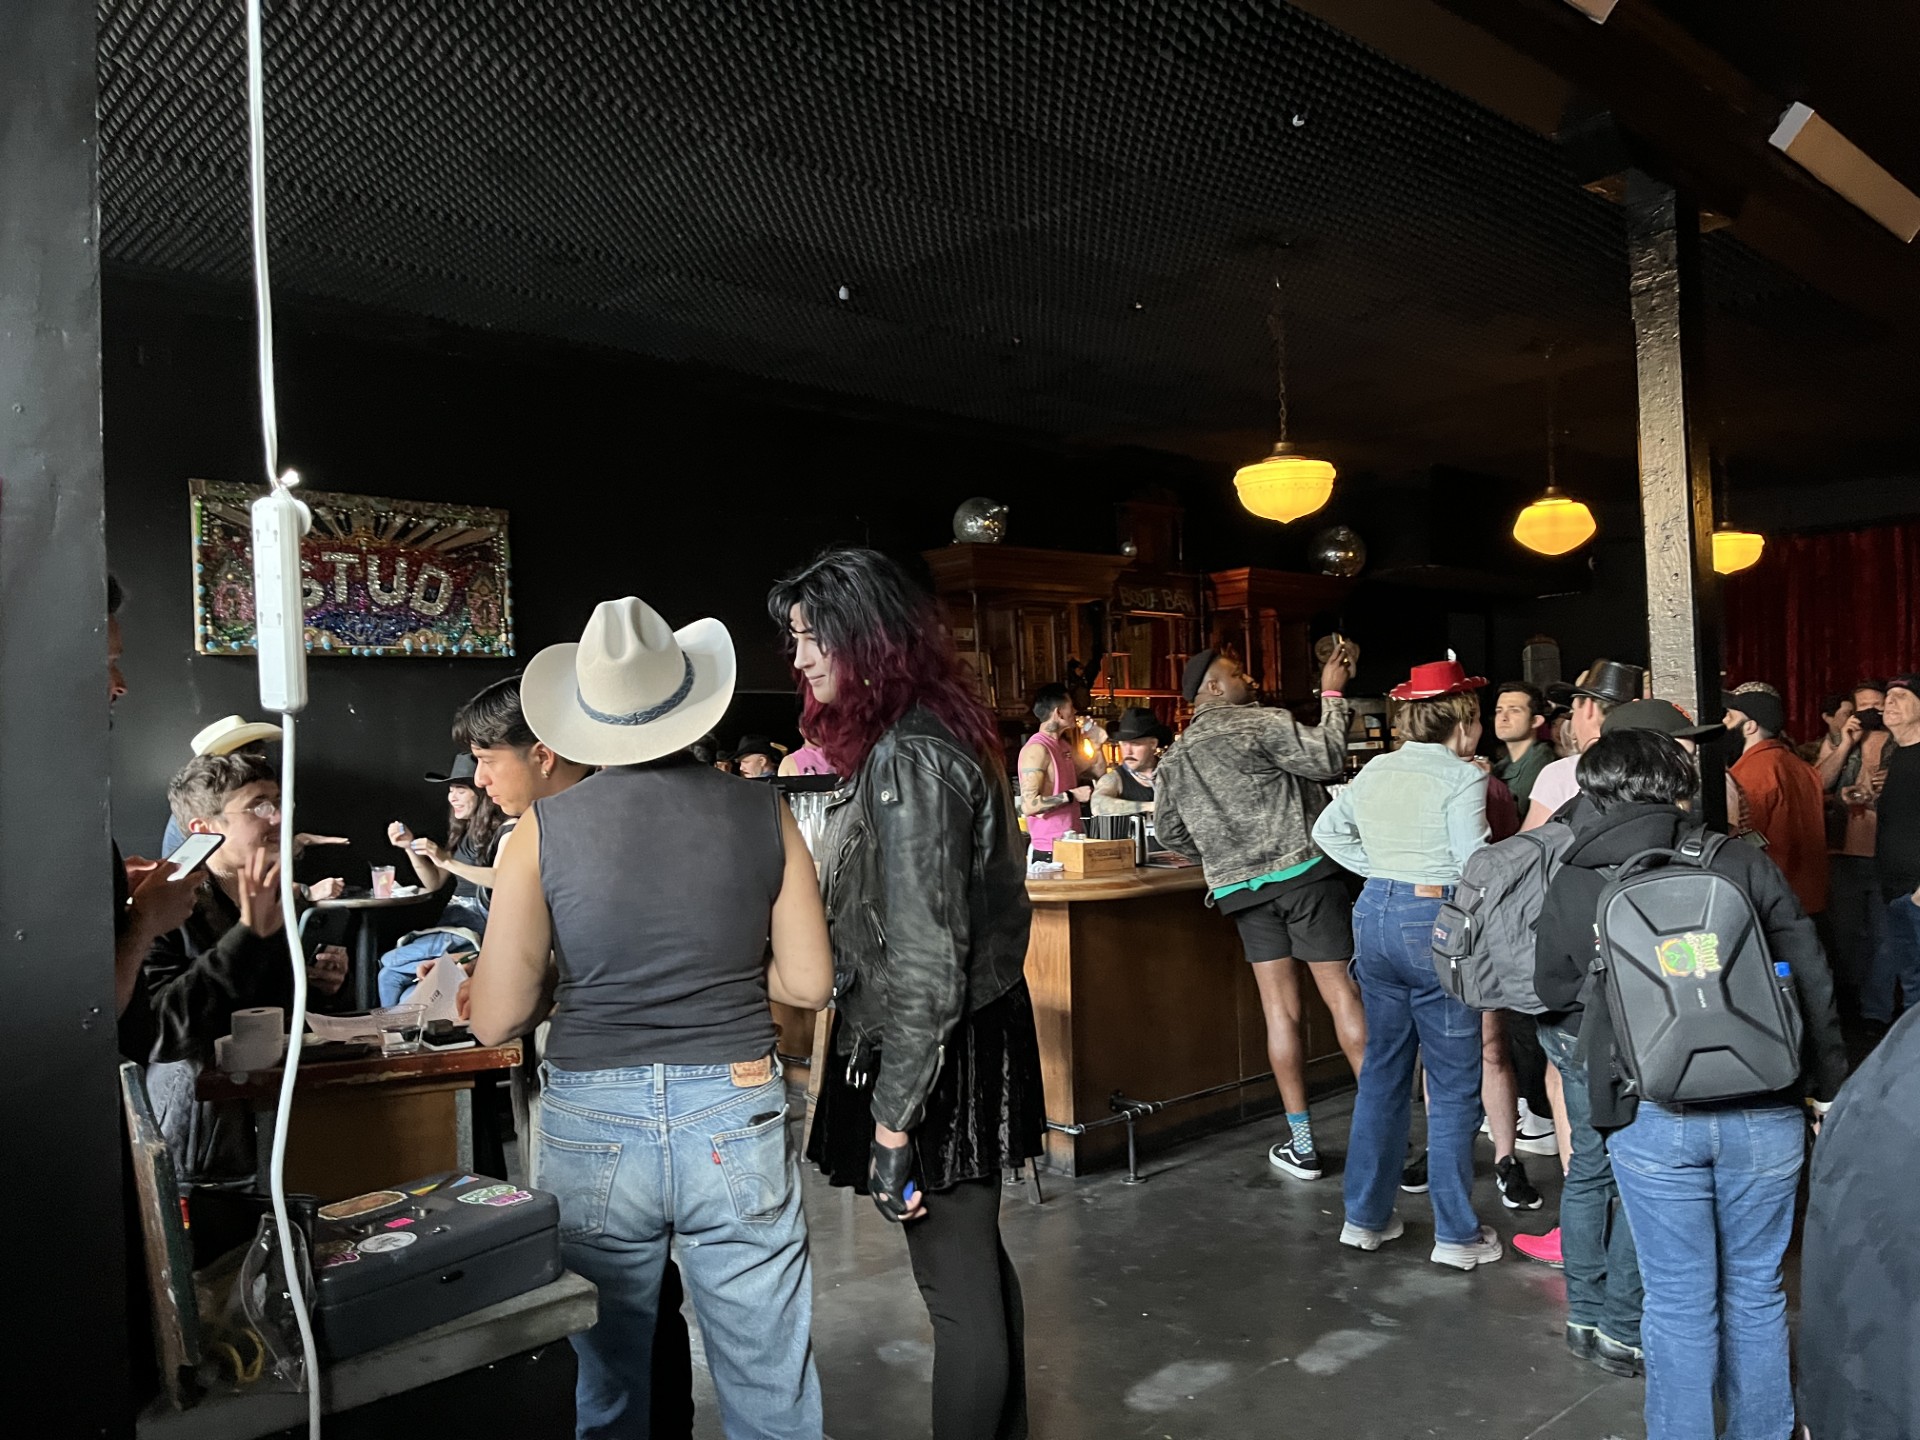 People line up in a dark bar to talk and get drinks at the bar. A sign on the wall reads 'The Stud.'